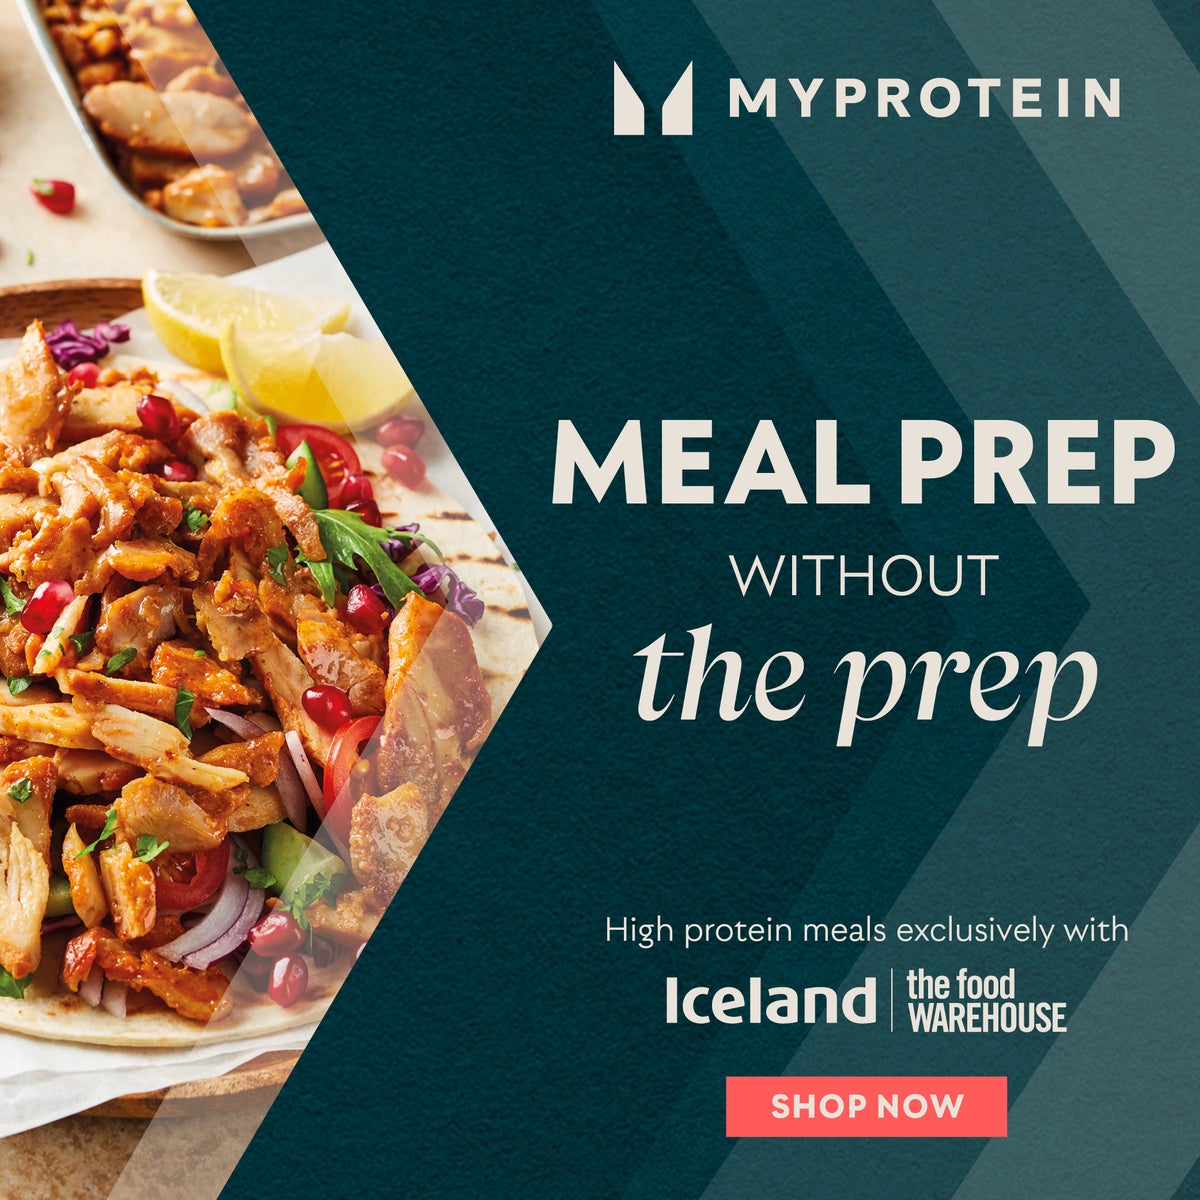 Banner highlighting Myprotein meals available exclusively at Iceland, 'Meal prep without the prep'. Image of a chicken wrap.